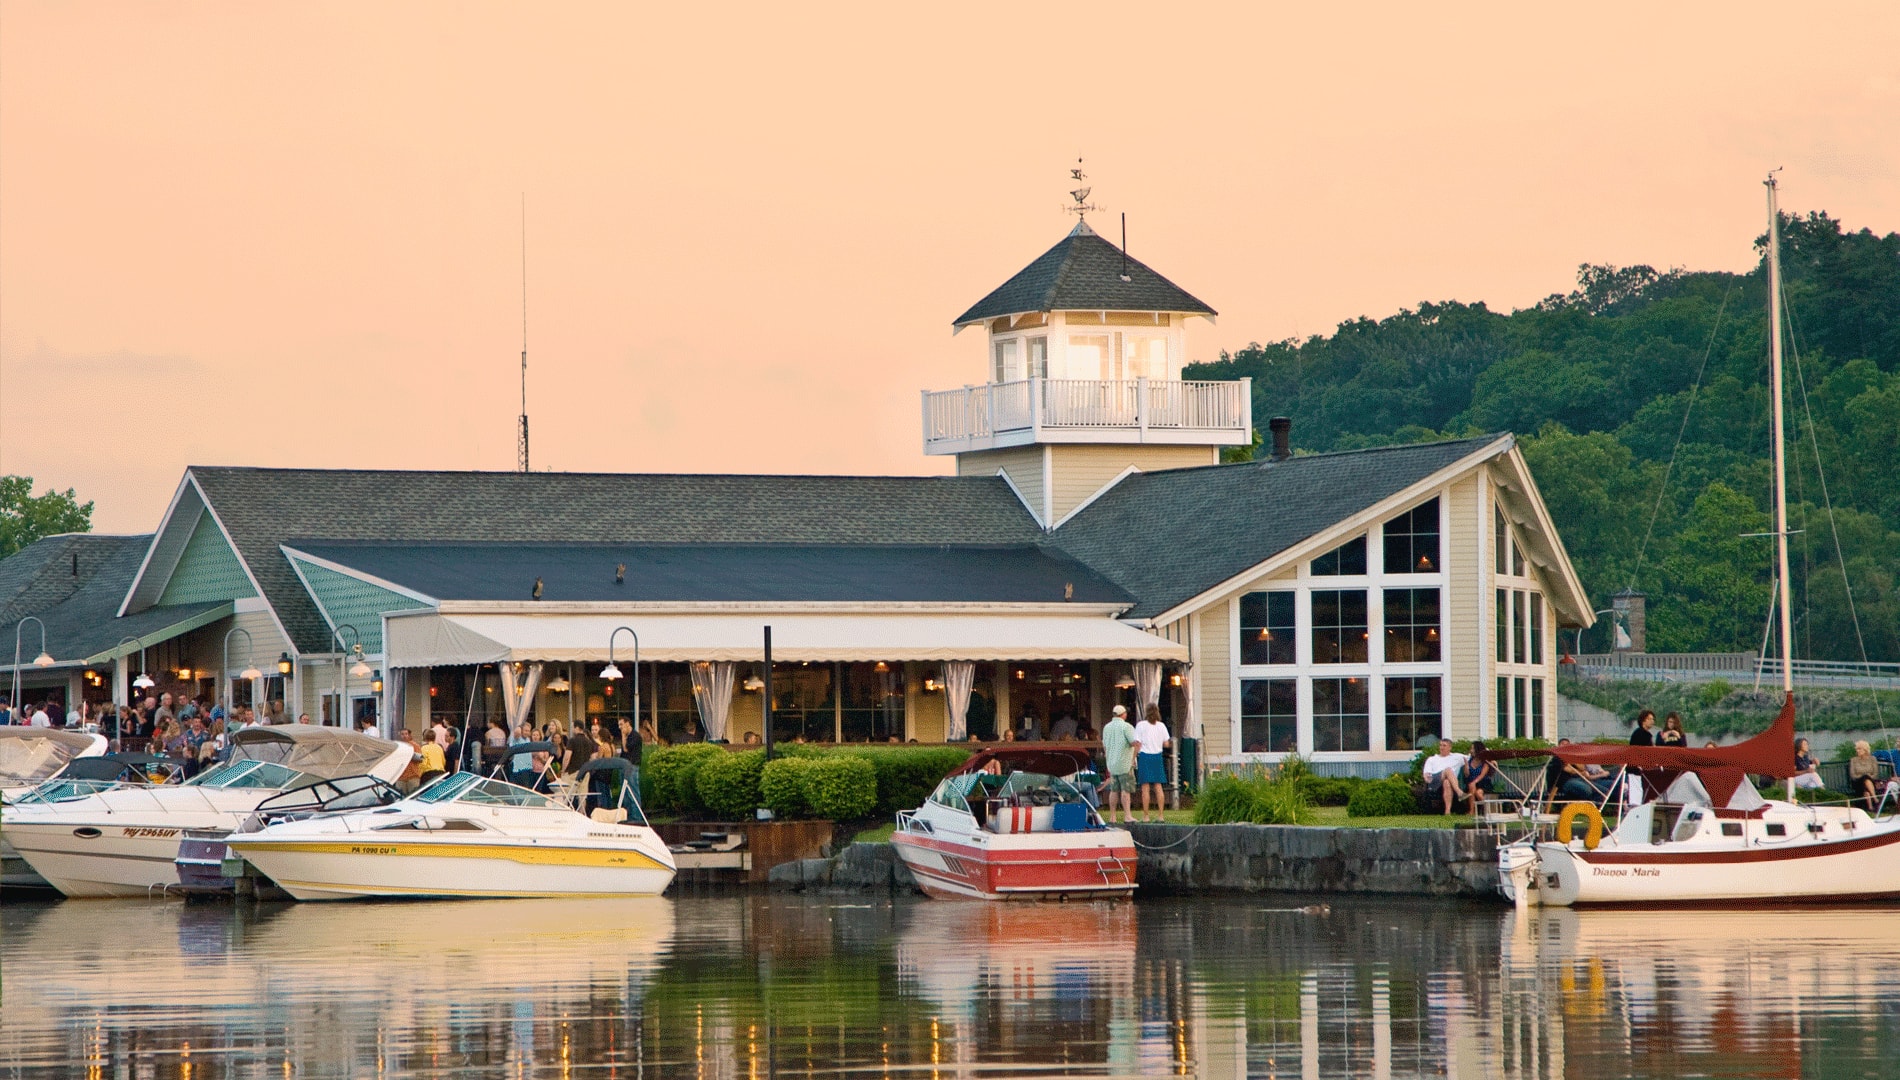 The BoatYard Grill, Ithaca's Premiere Waterfront Restaurant